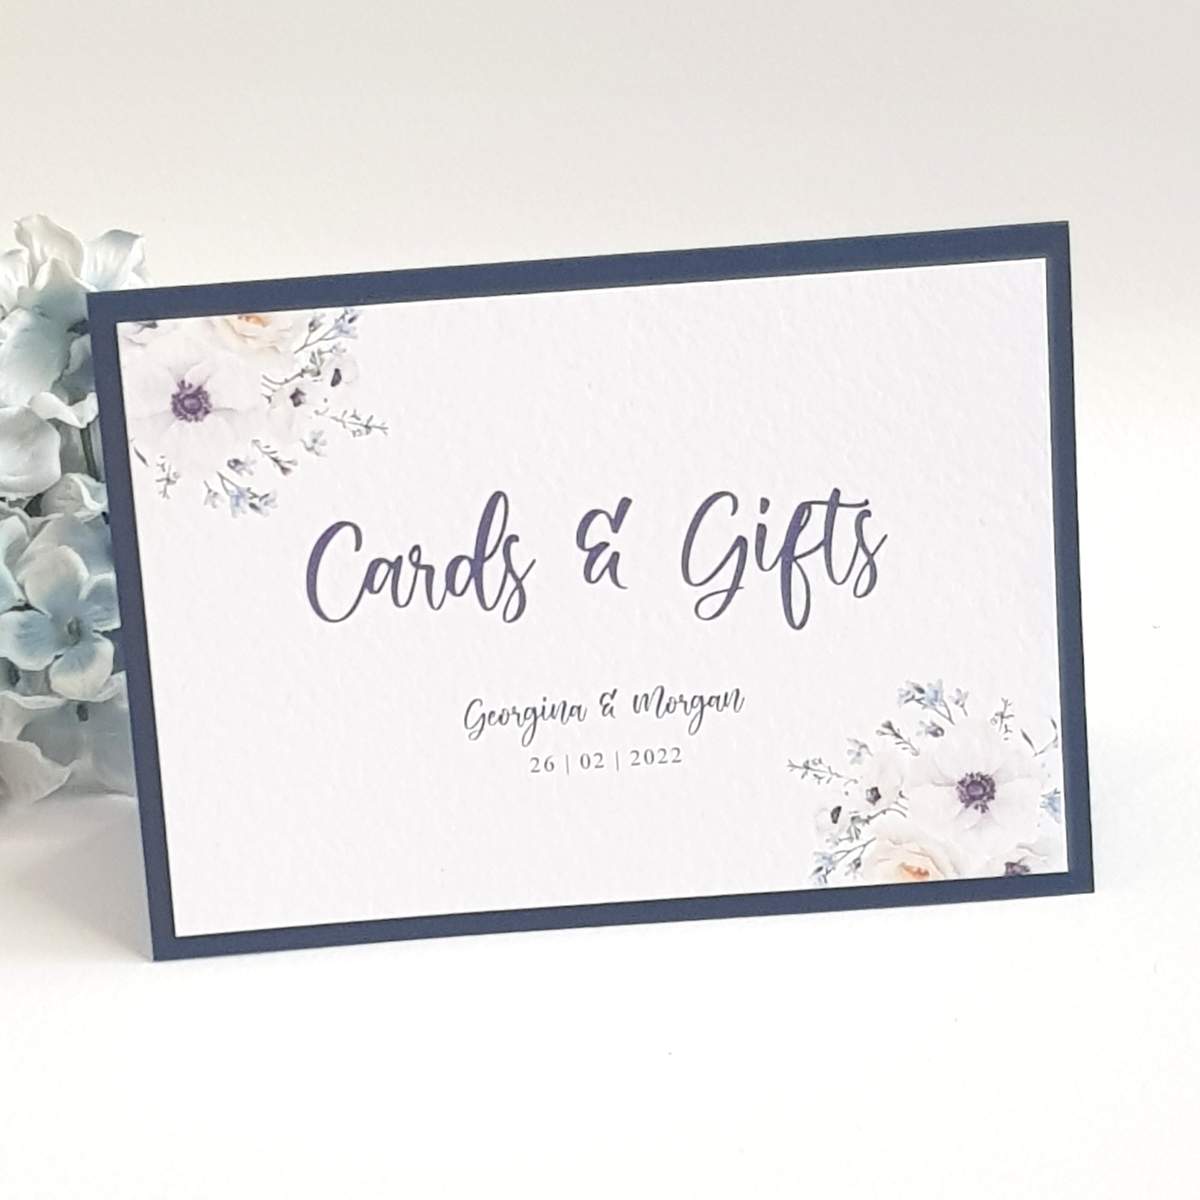 A wedding sign for cards and gifts with navy text an anemone flowers